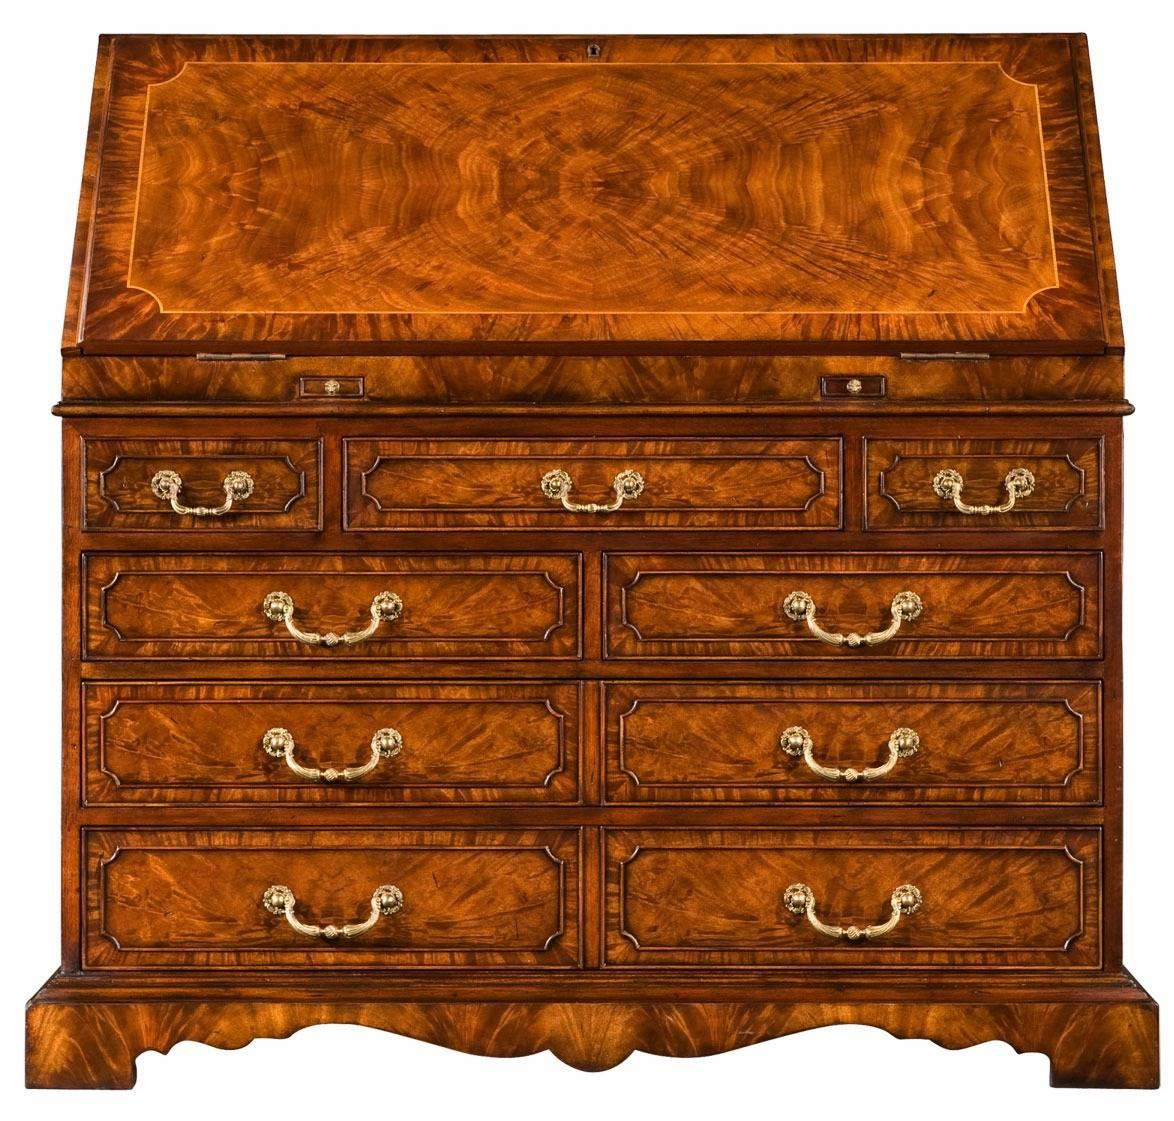 An ingenious mahogany bureau desk in the George III manner. The sloping fall front encloses an elaborately fitted interior of faux books and hidden drawers and cabinets. The staircase gallery interior has suede panelling with a short frieze drawer